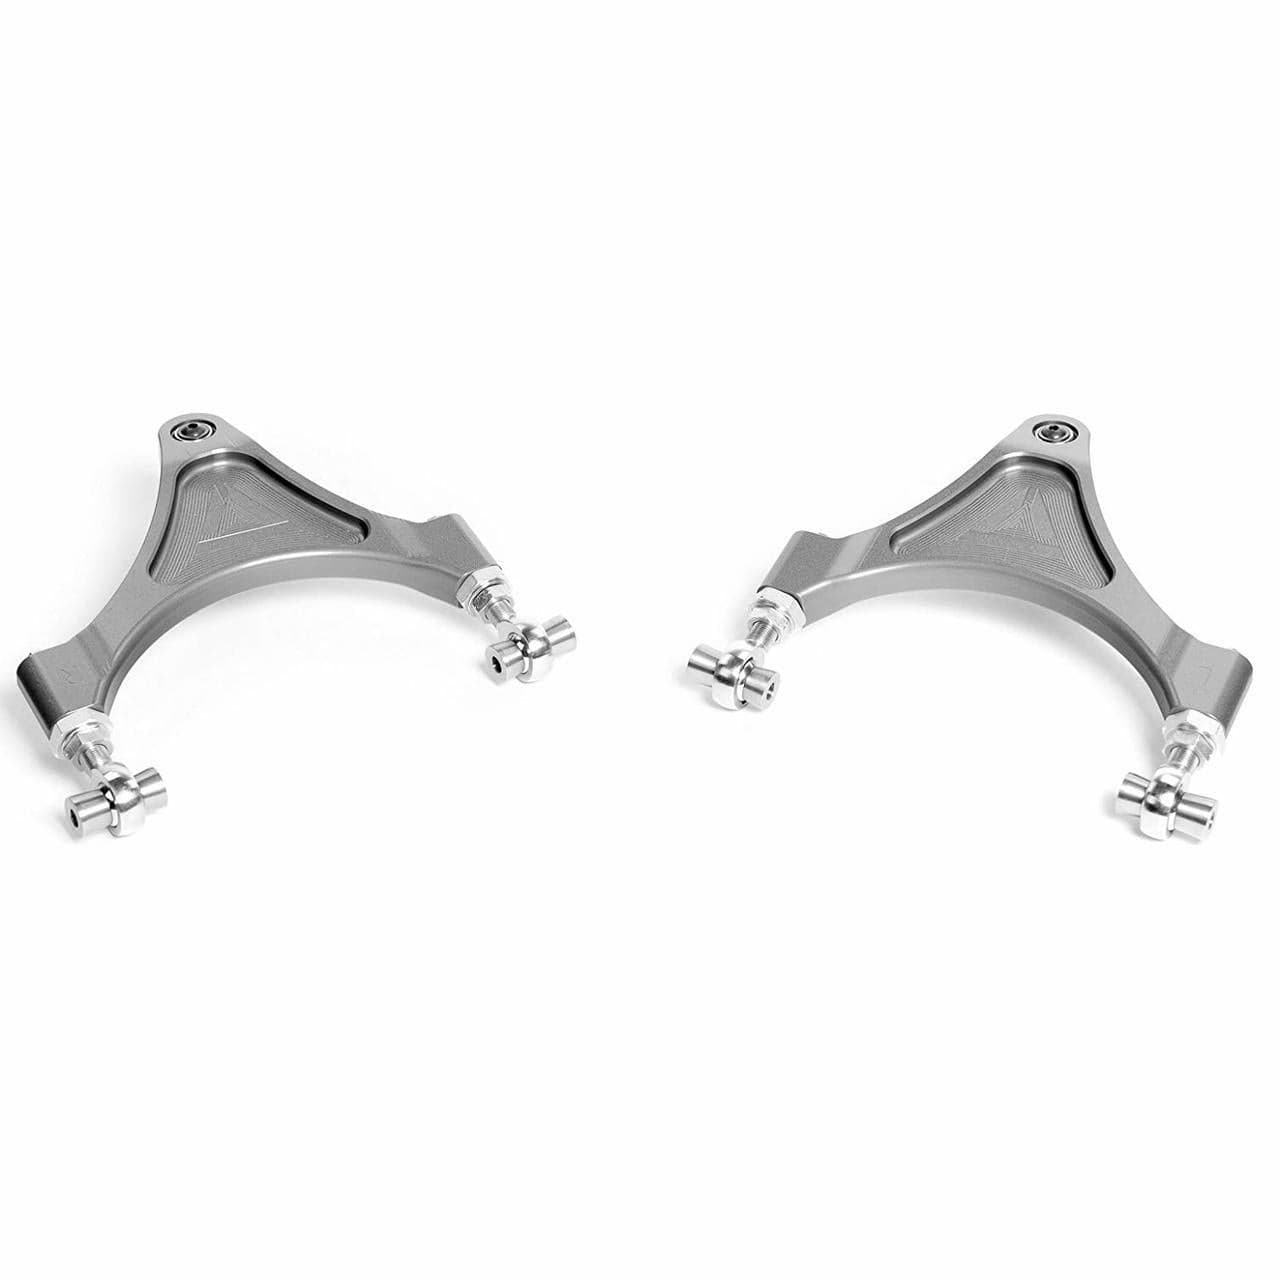 Voodoo13 Upper Control Arms (Front) - 2003-2007 Infiniti G35 Coupe RWD